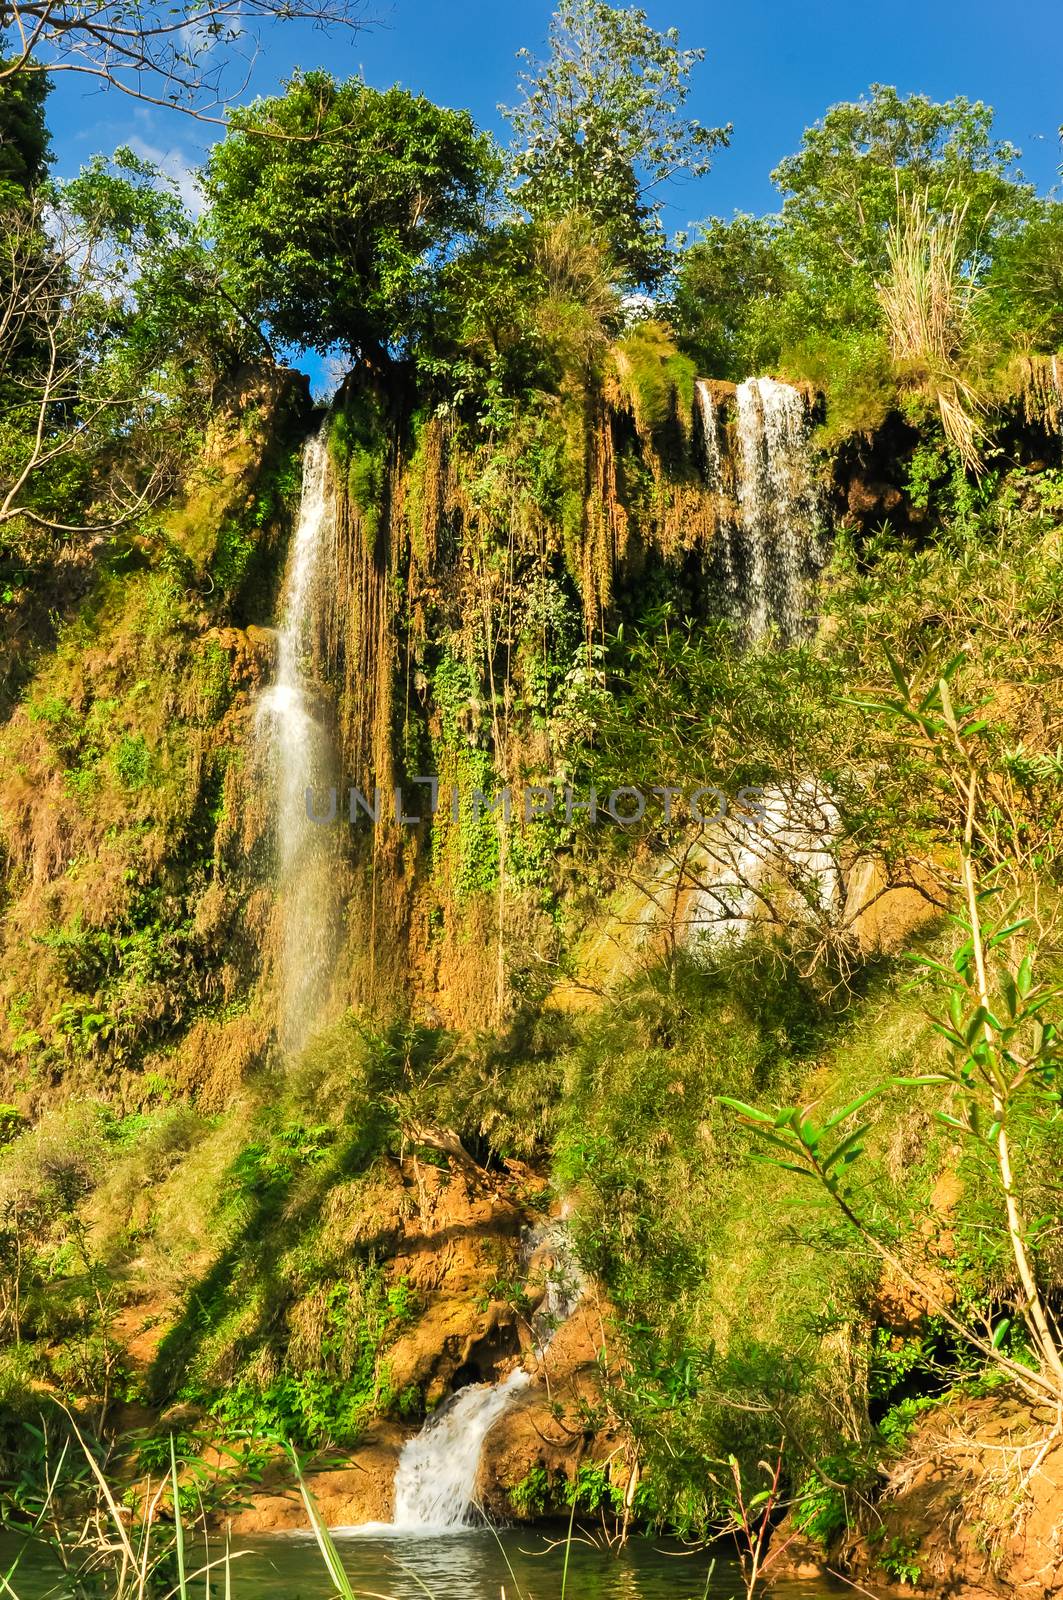 Dai Yem (Pink Blouse) waterfall in Muong Sang Commune, Moc Chau District, Son La Province. Small current fall gushes down its slope with small and medium rocks in various shapes, dazzling white